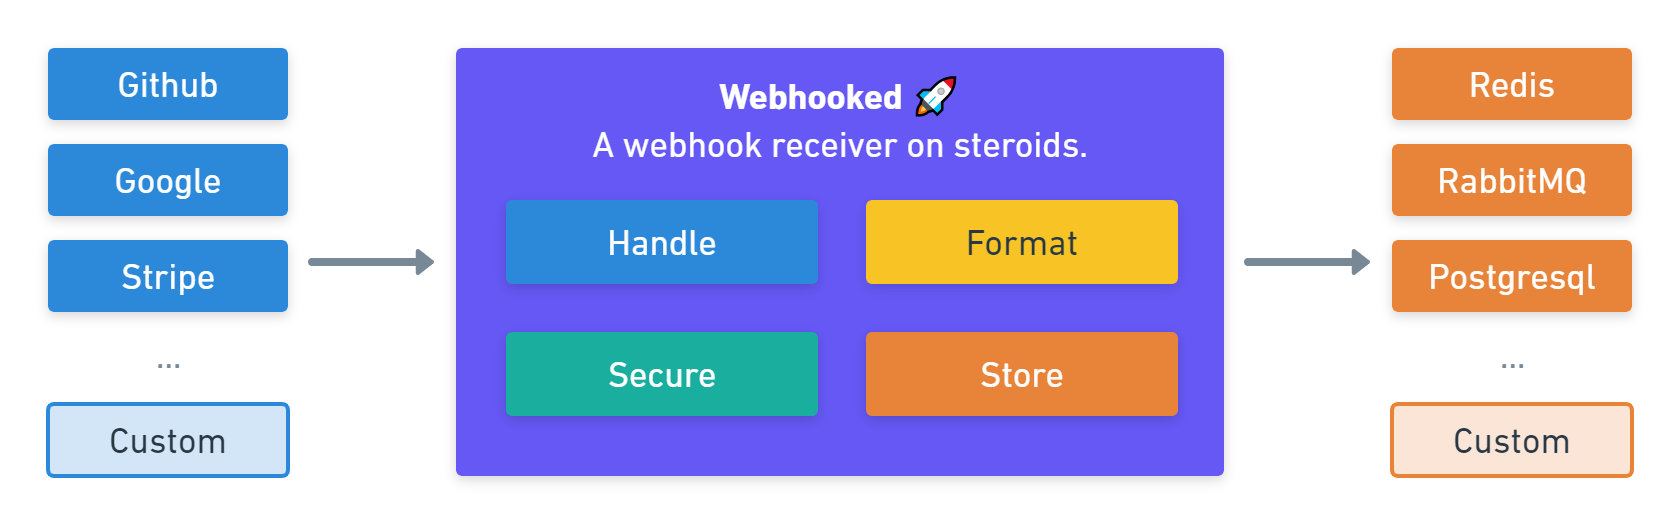 webhooked.png